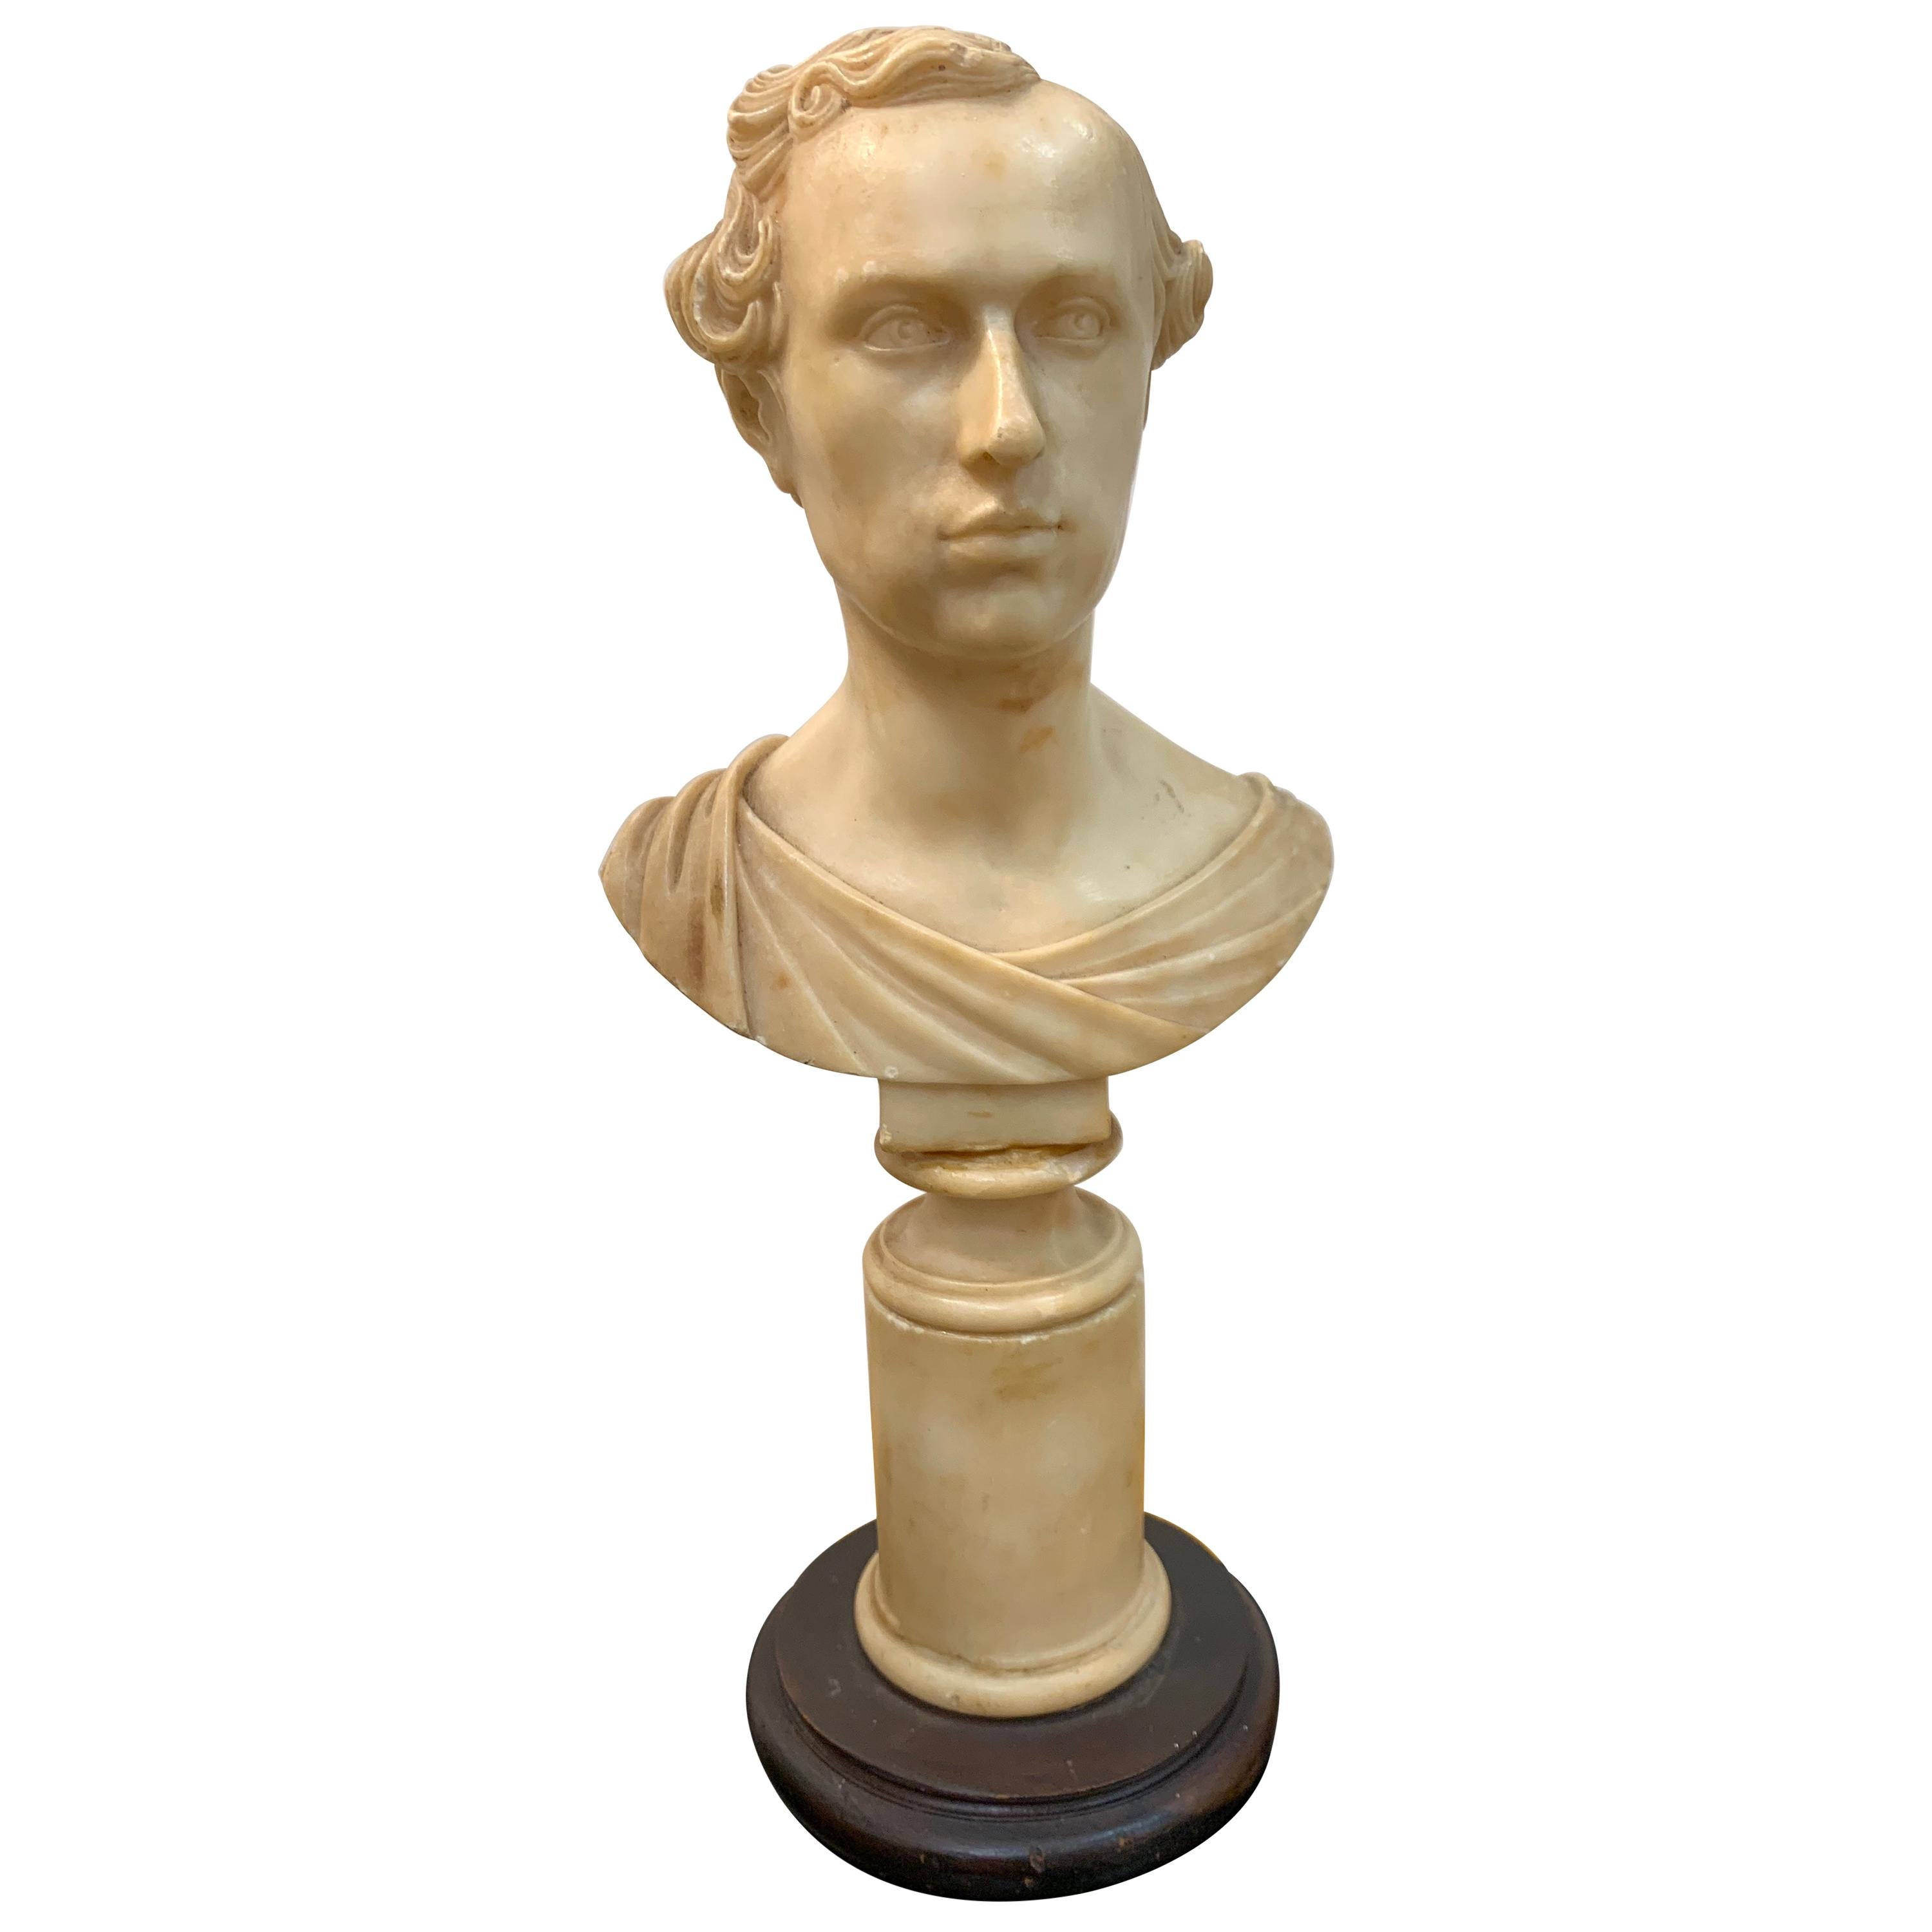 Italian Neoclassical Alabaster Portrait Bust of a Gentleman, by Insom Fece, 1839